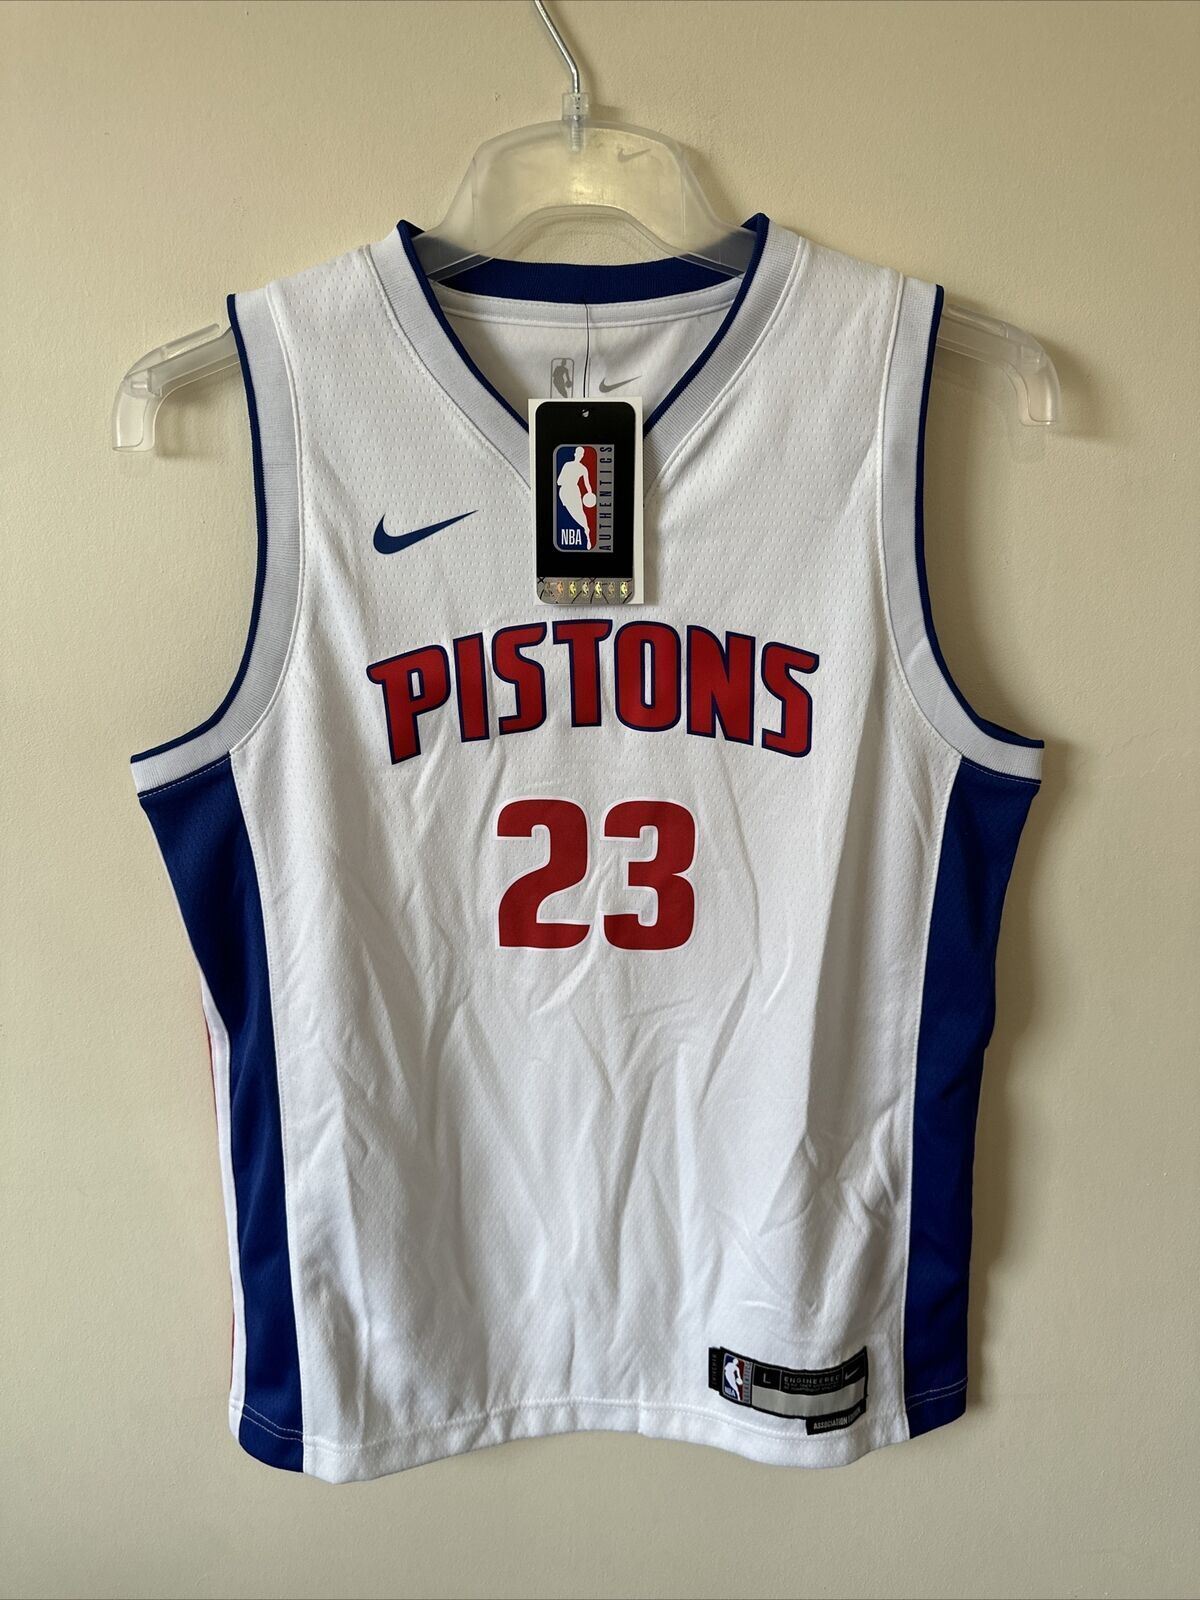 Nike NBA Detroit Pistons Association Edition Jersey Youth 12-13 Years